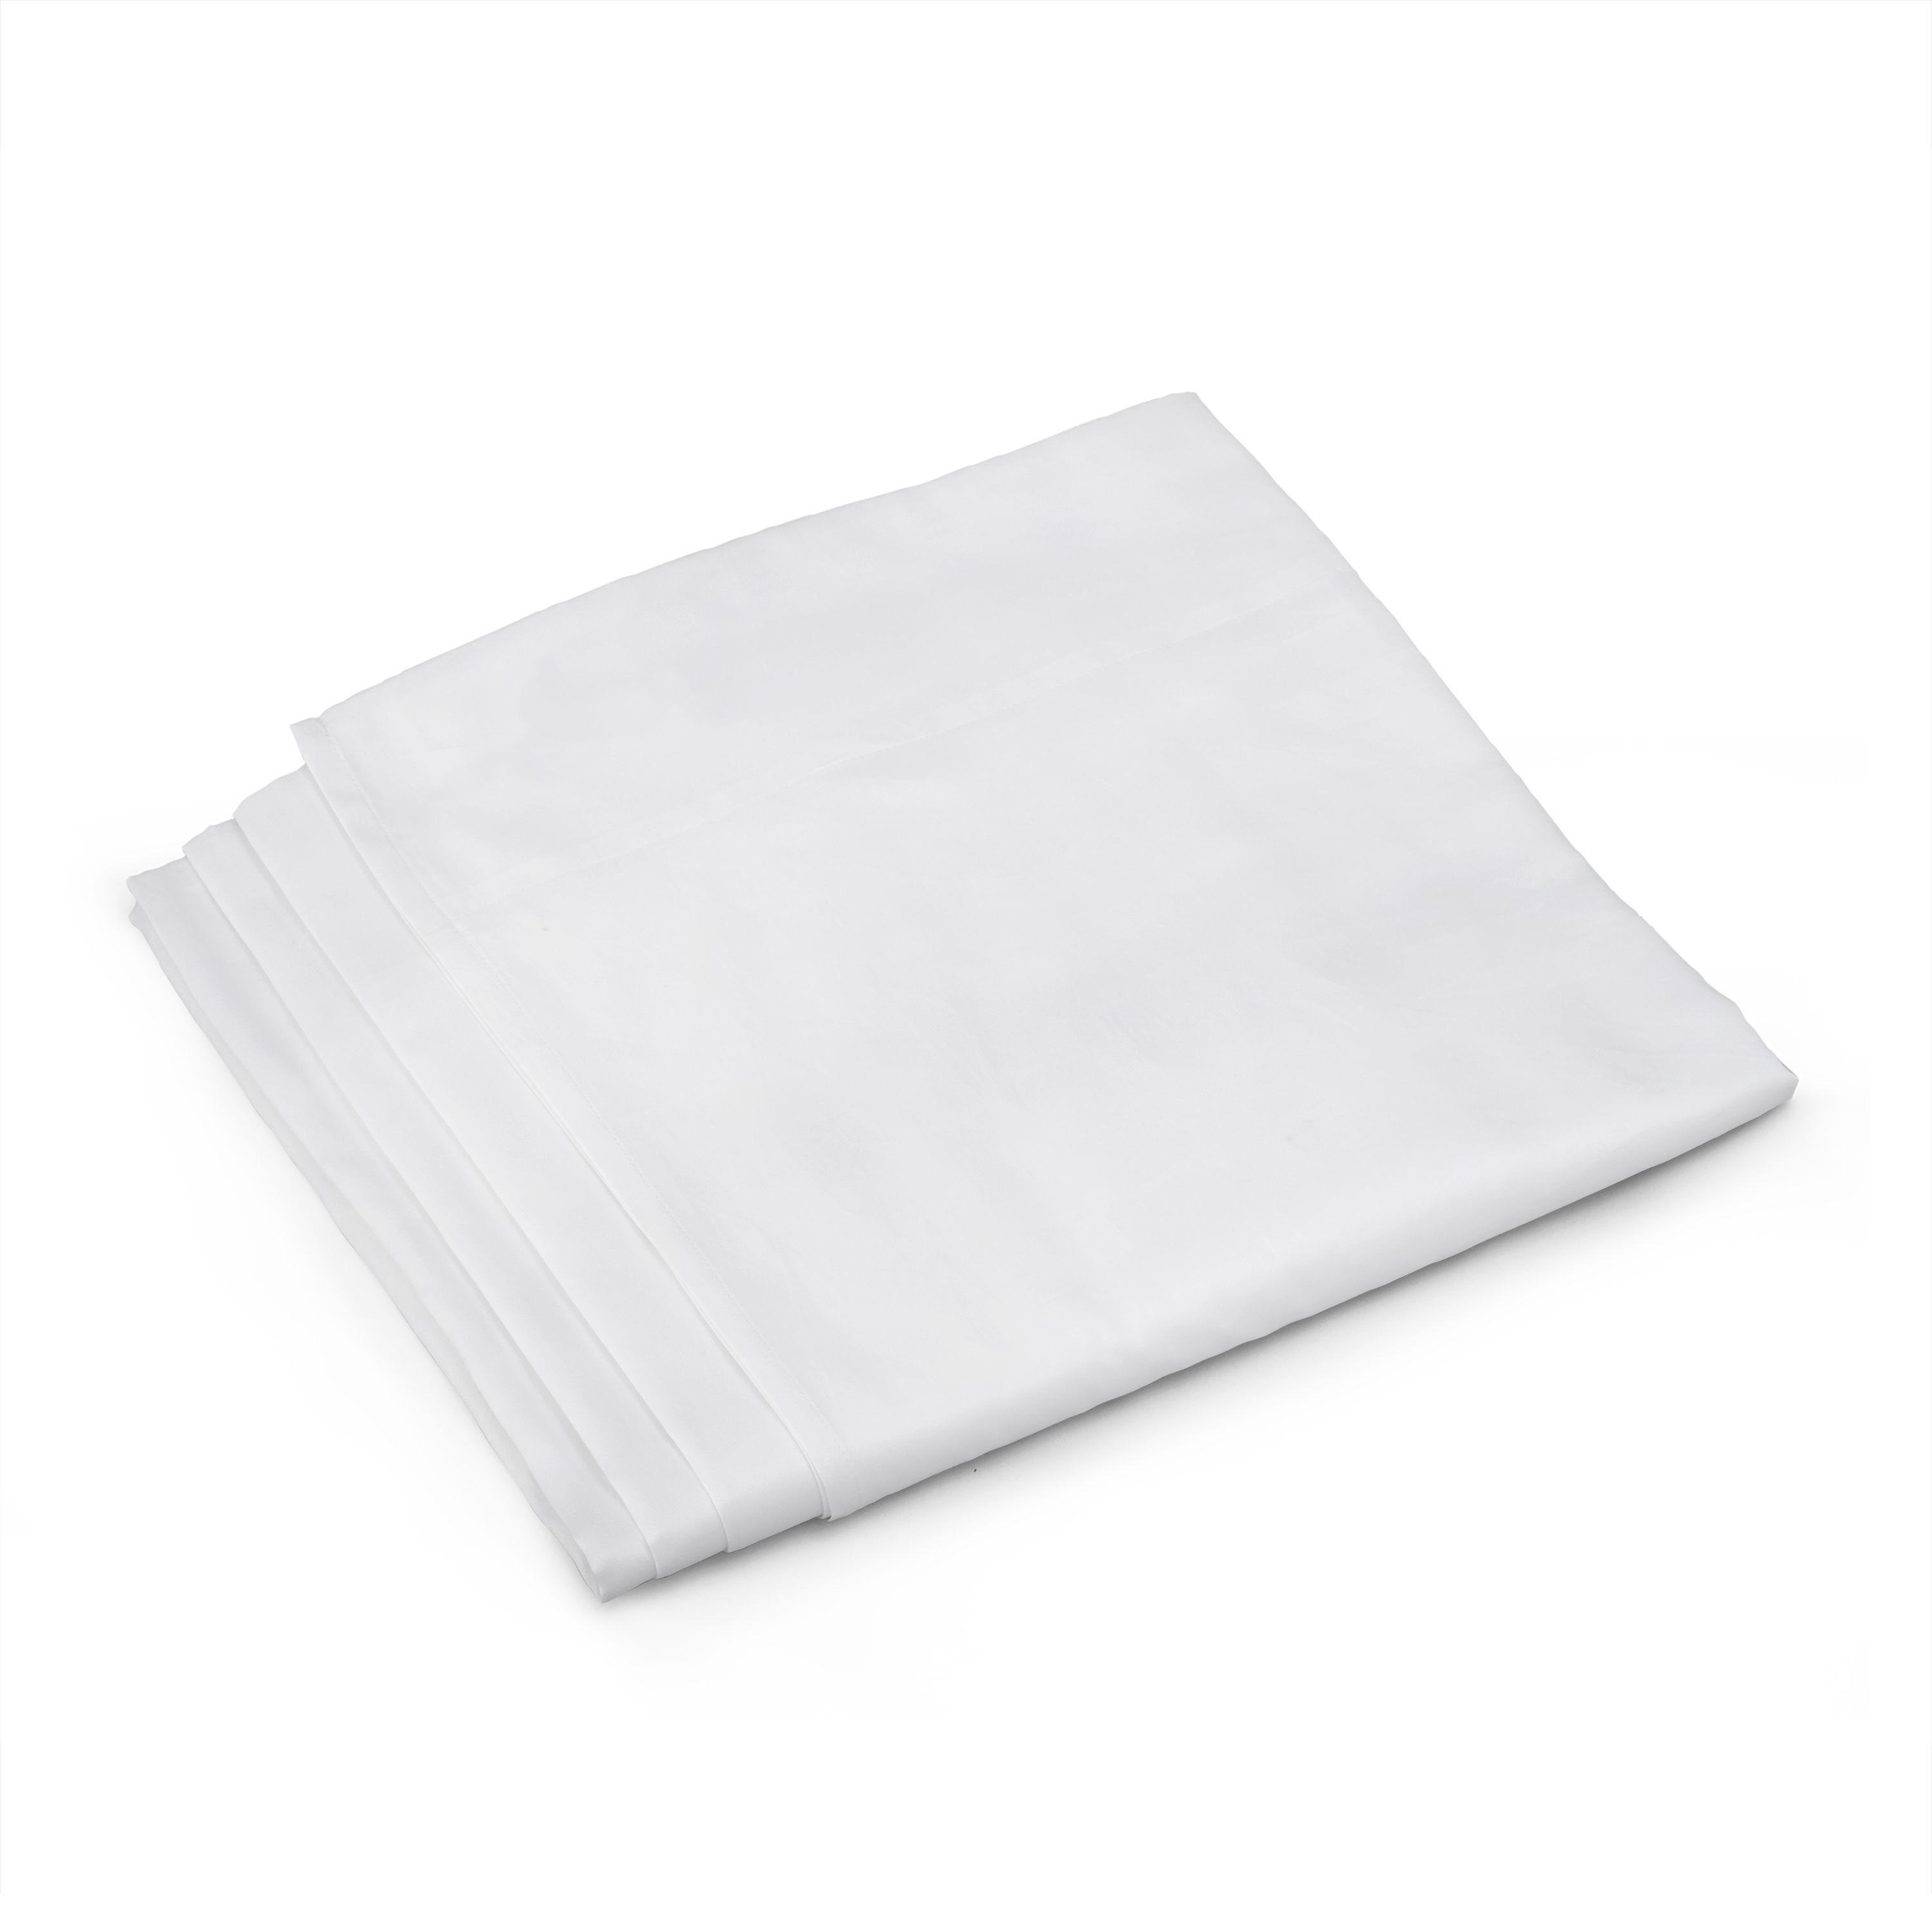 Hotel Collection Flat Sheet - image 1